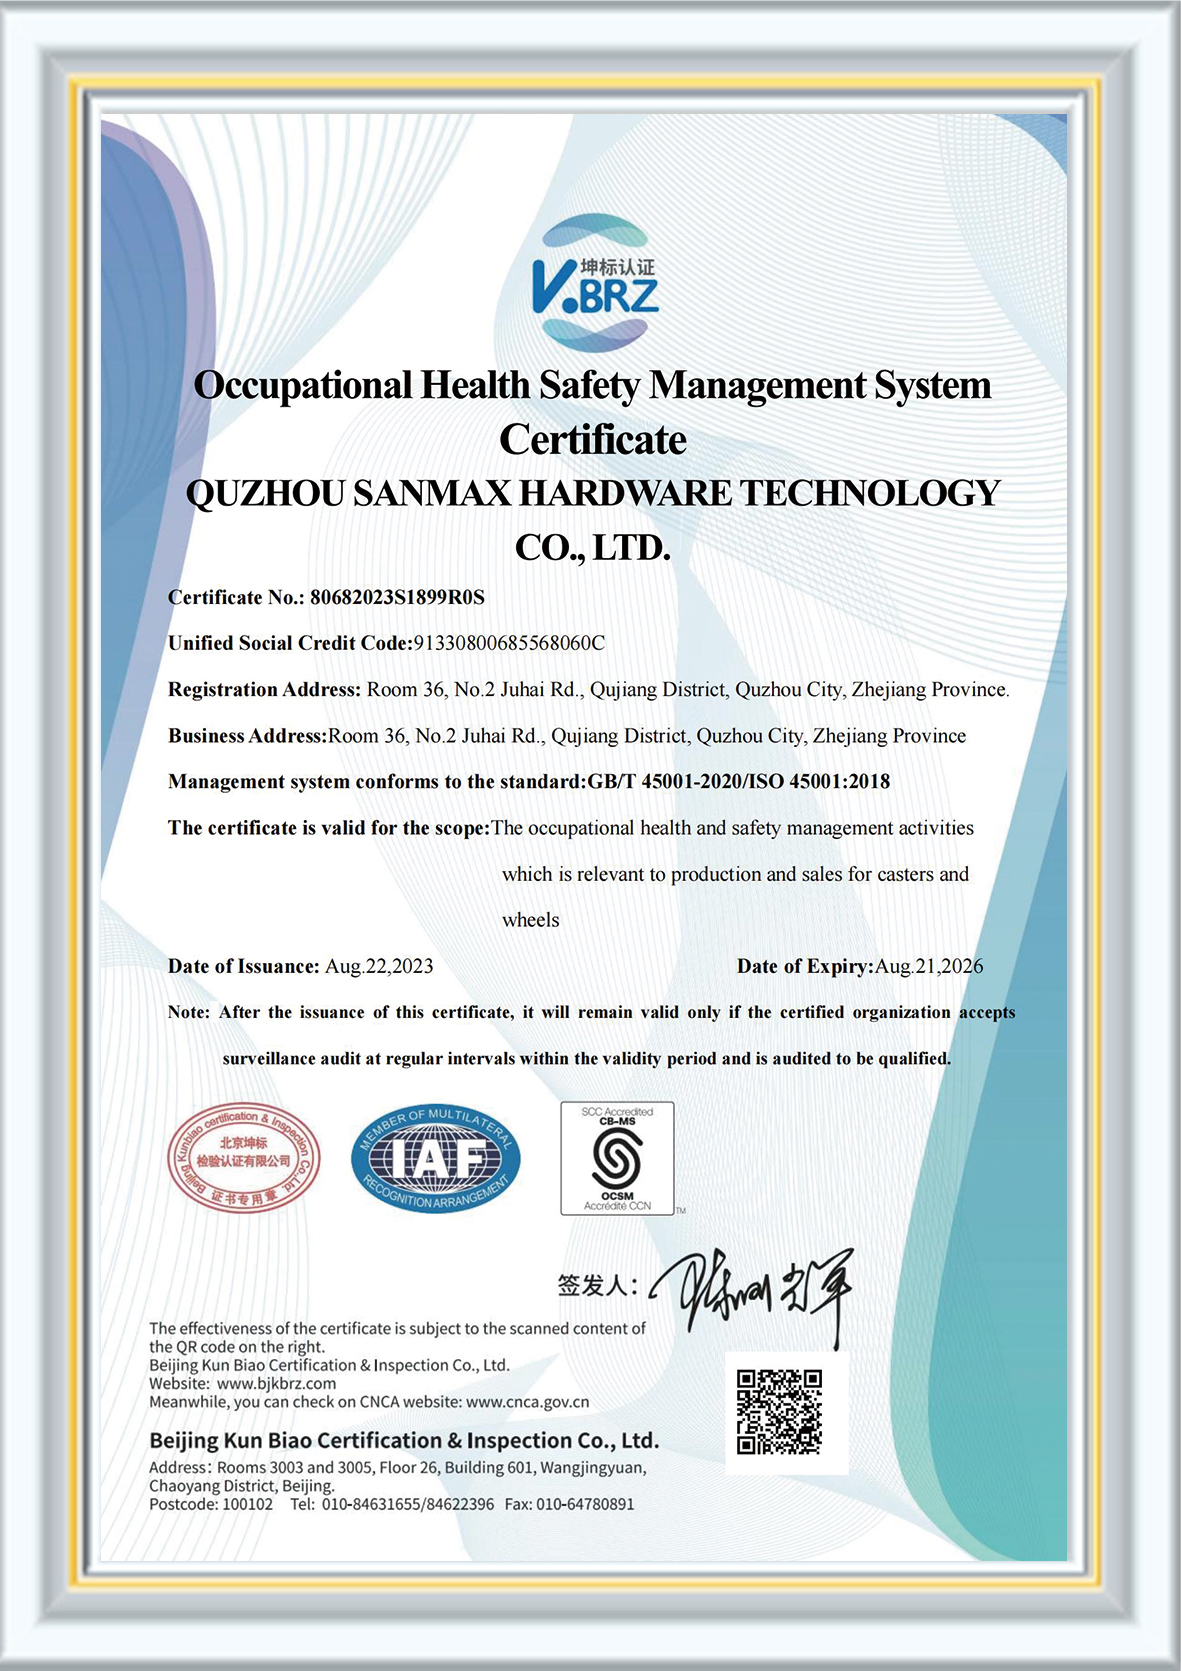 Occupational Health Safety Management System Certificate